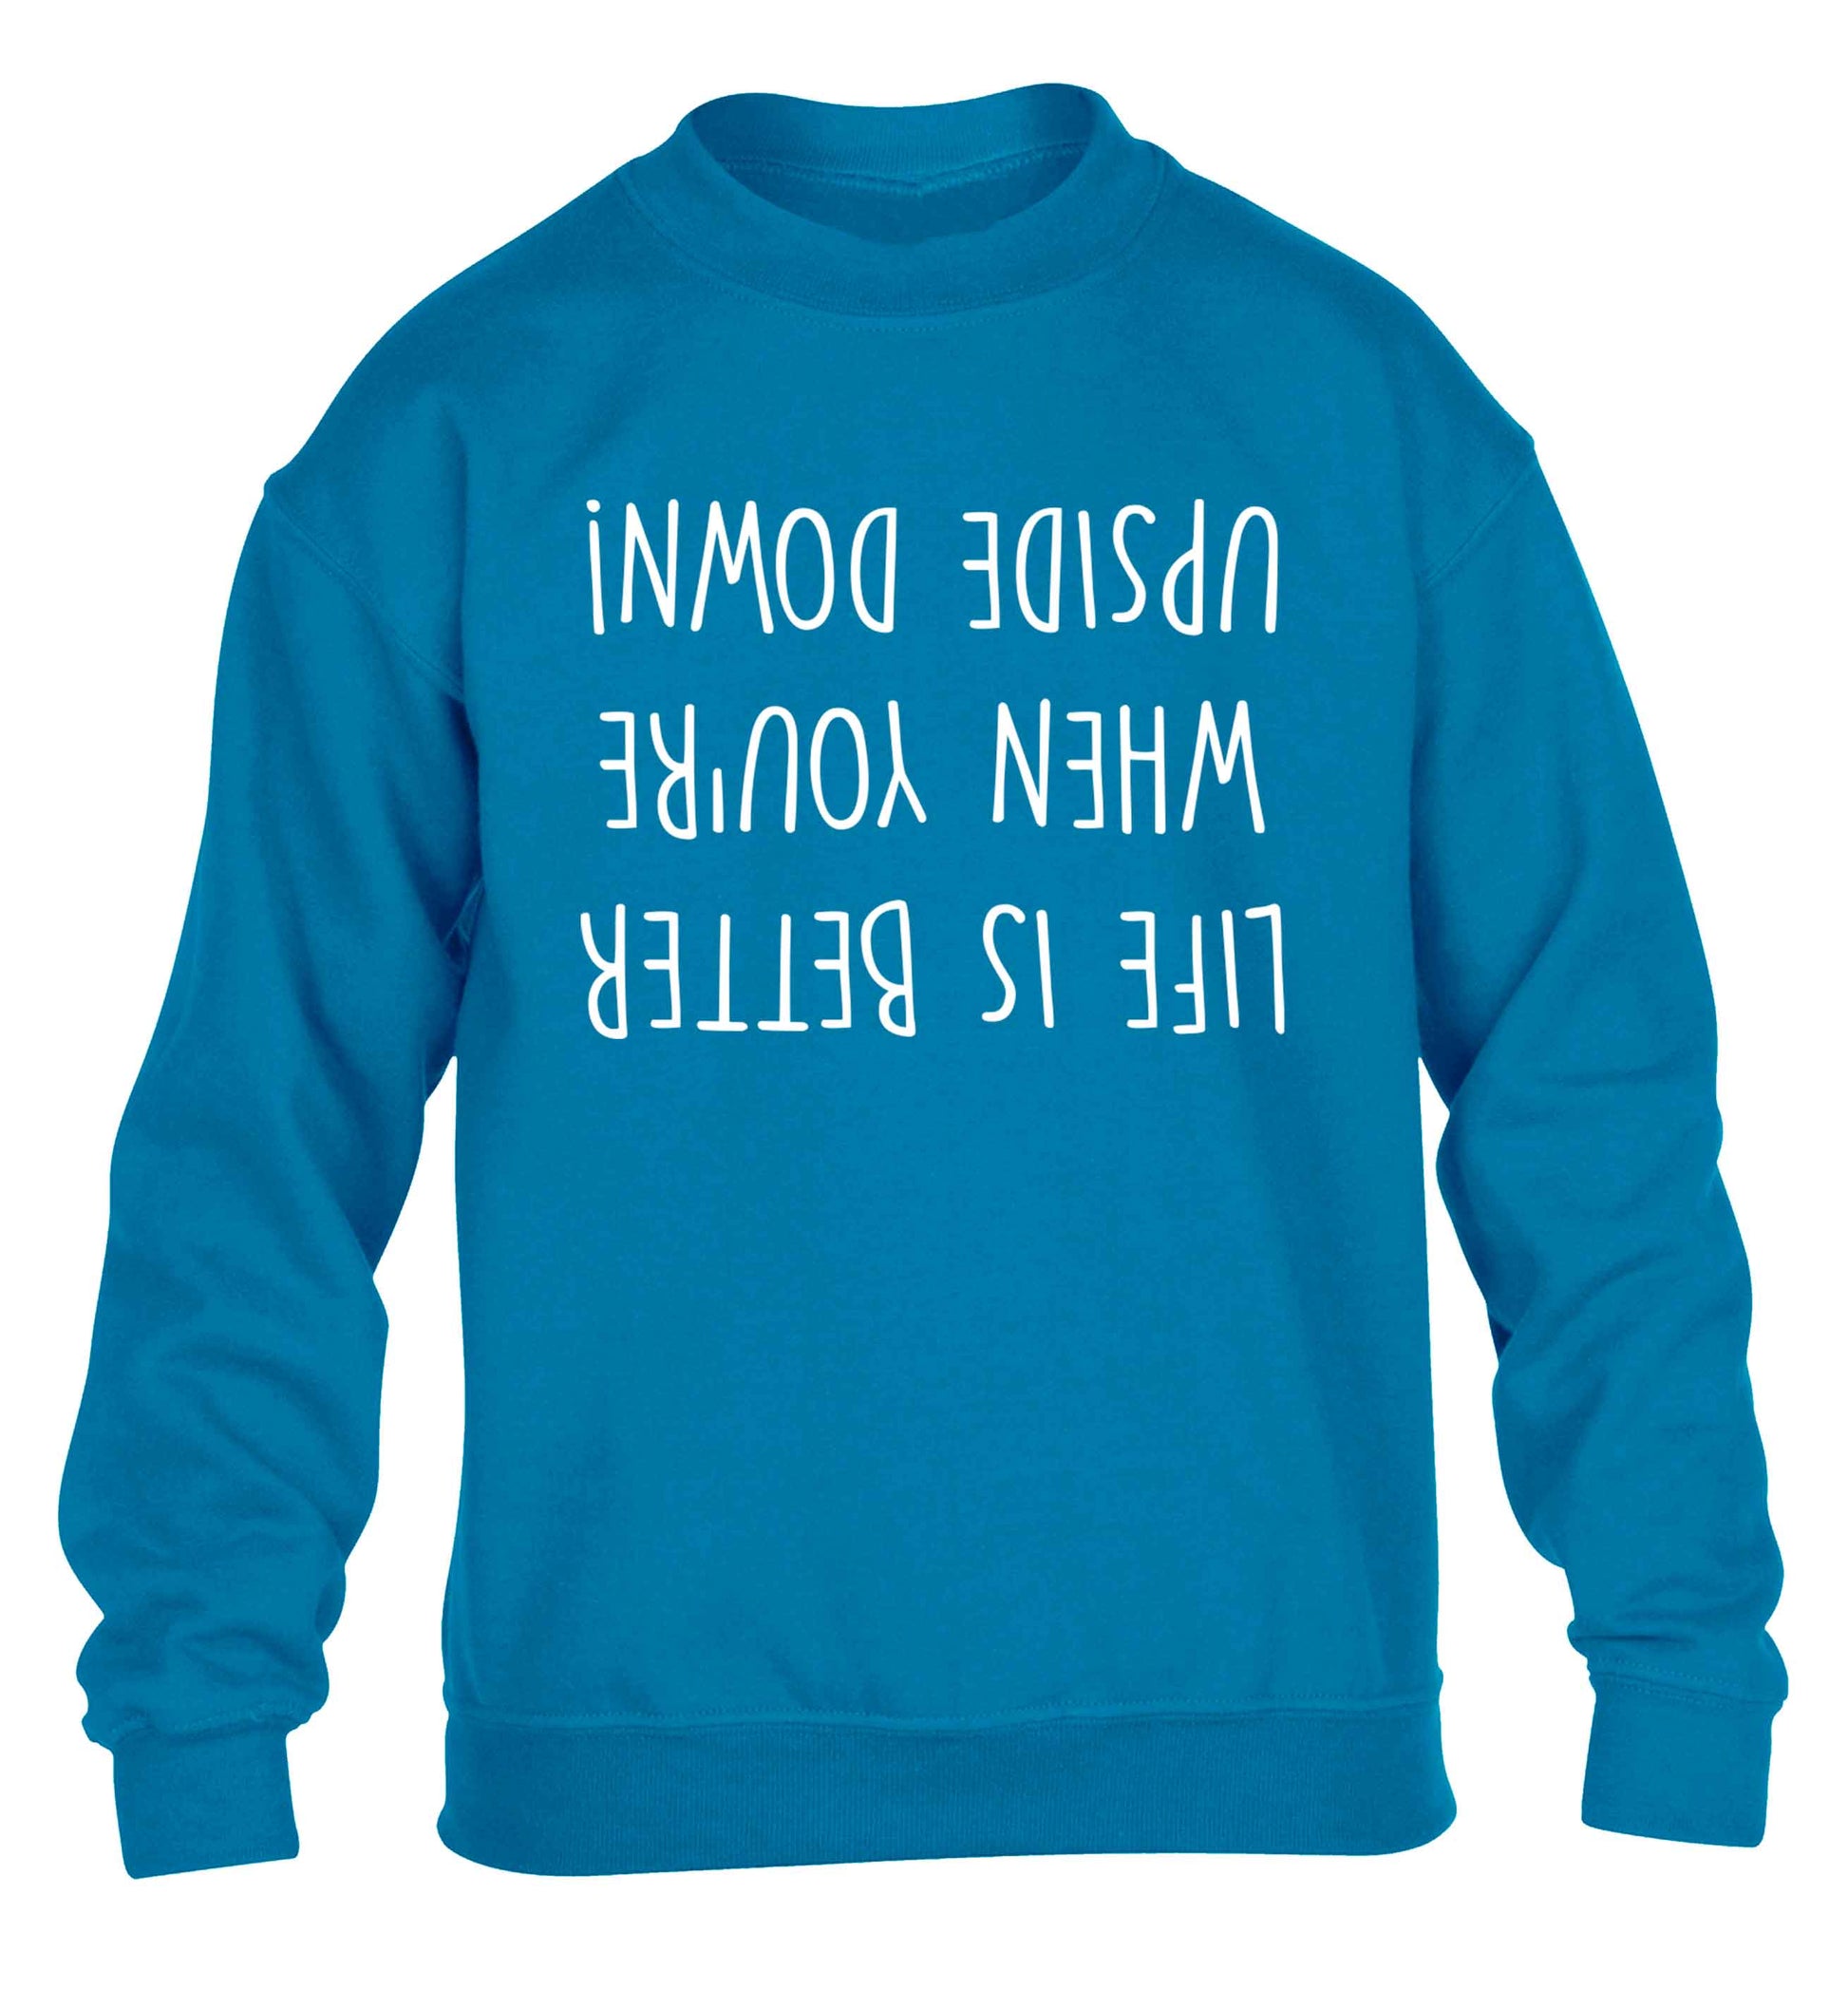 Life is better upside down children's blue sweater 12-13 Years